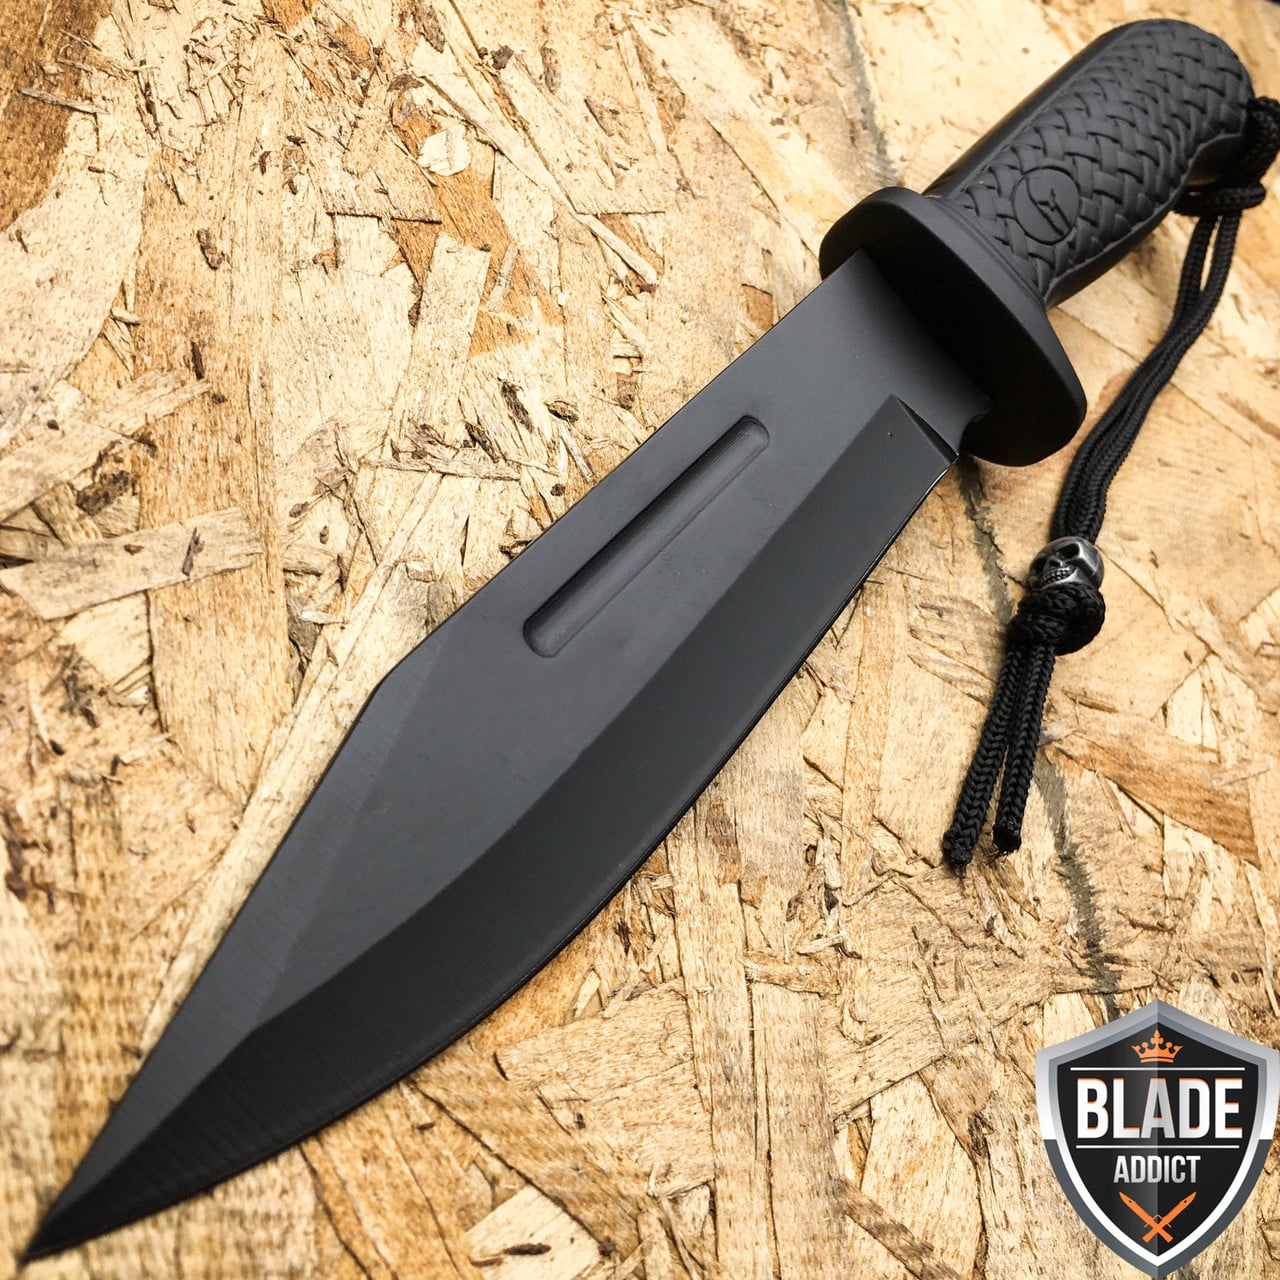 12" BLACK HUNTING SURVIVAL FIXED BLADE MACHETE TACTICAL Rambo Knife Sword SPEAR